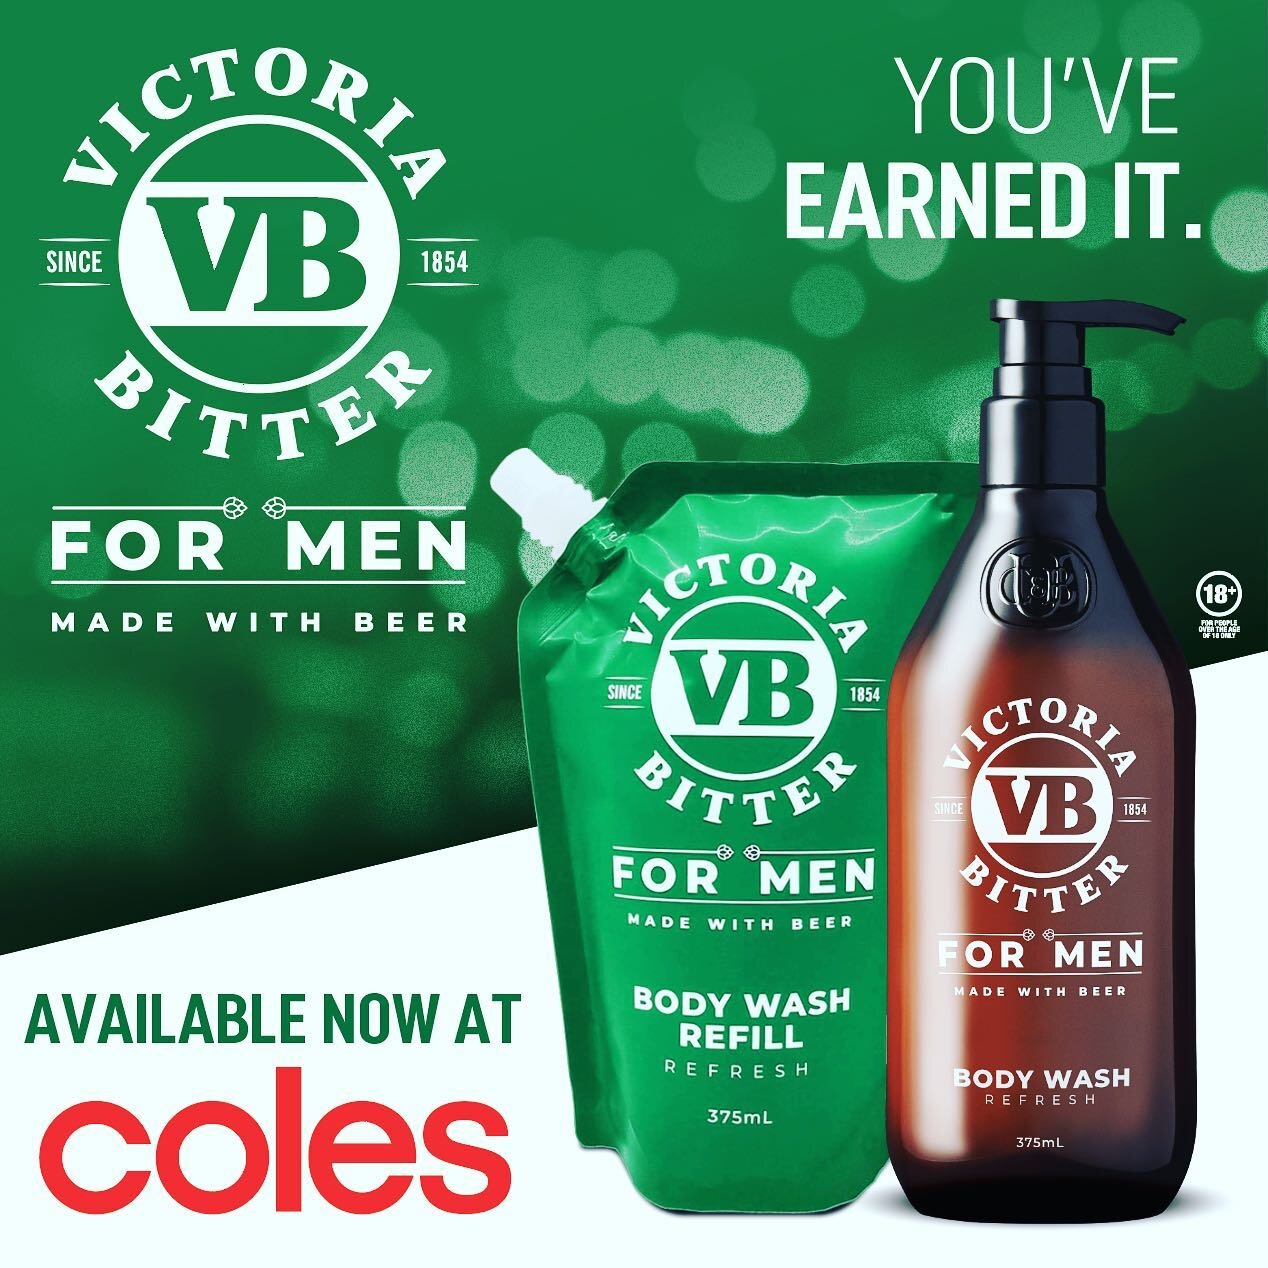 VB for Men Body Wash and NEW Body Wash refill packs available now at @colessupermarkets !

YOU&rsquo;VE EARNED IT.

#vb #victoriabitter #beer #aussie #coles #refillpack